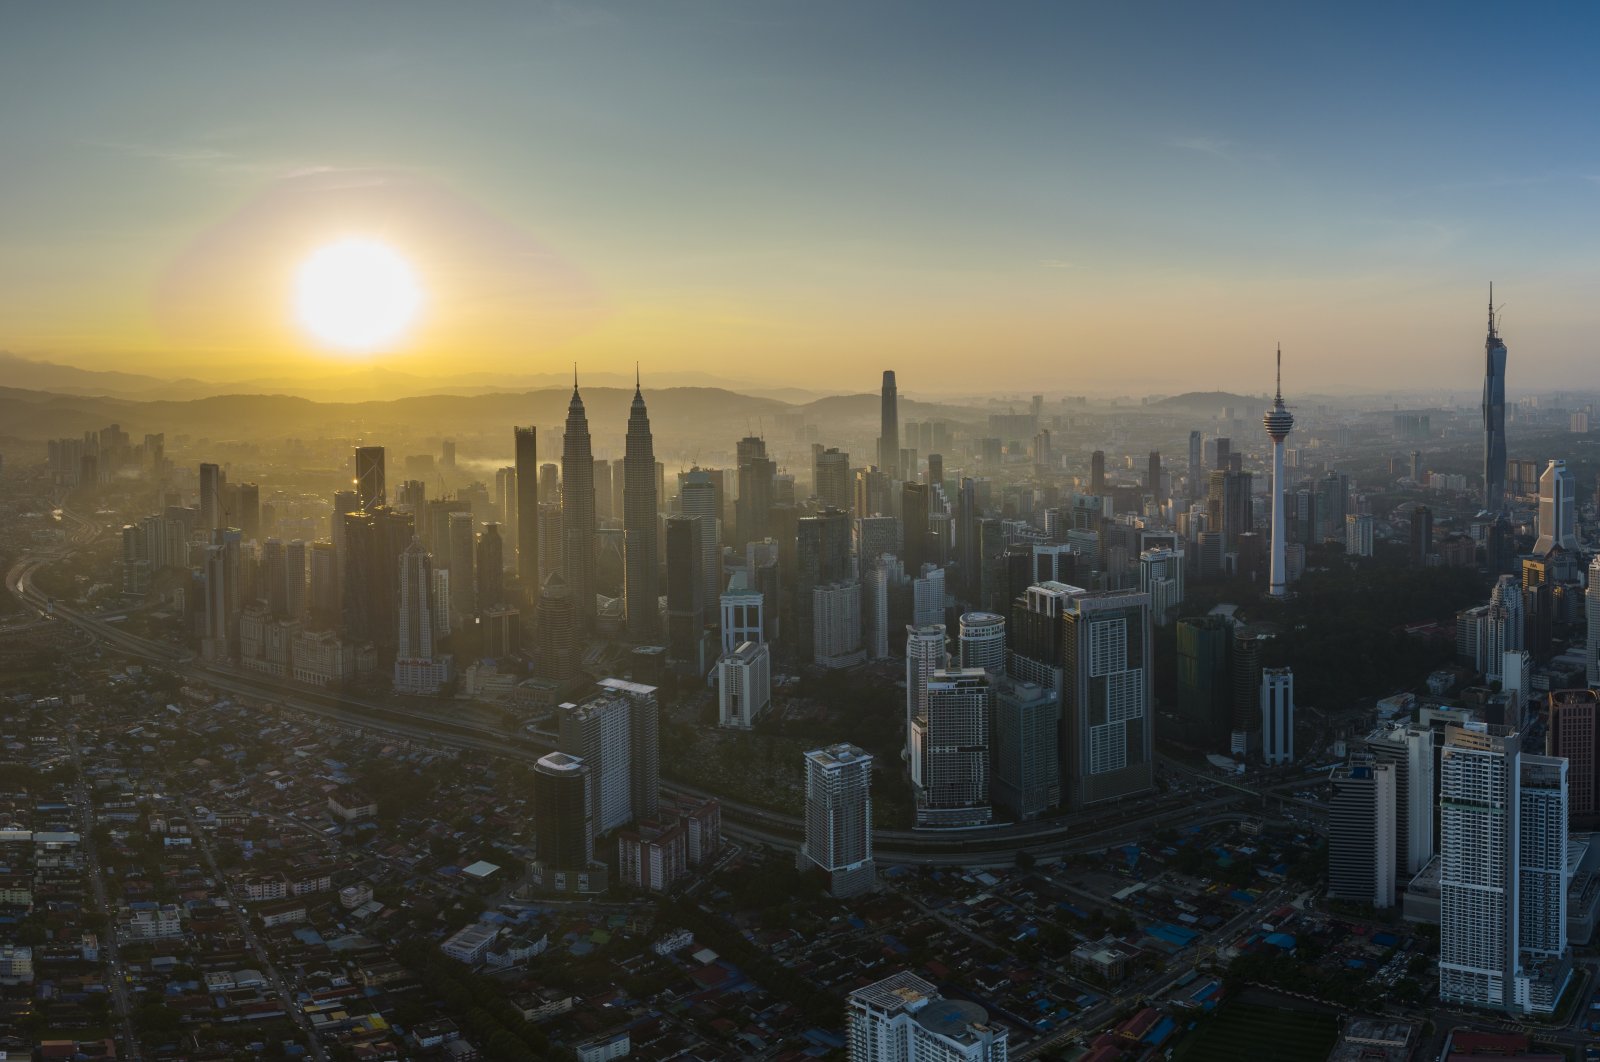 The sun rises in the background of the city center in Kuala Lumpur, Malaysia, Jan. 21, 2022. (AP Photo)